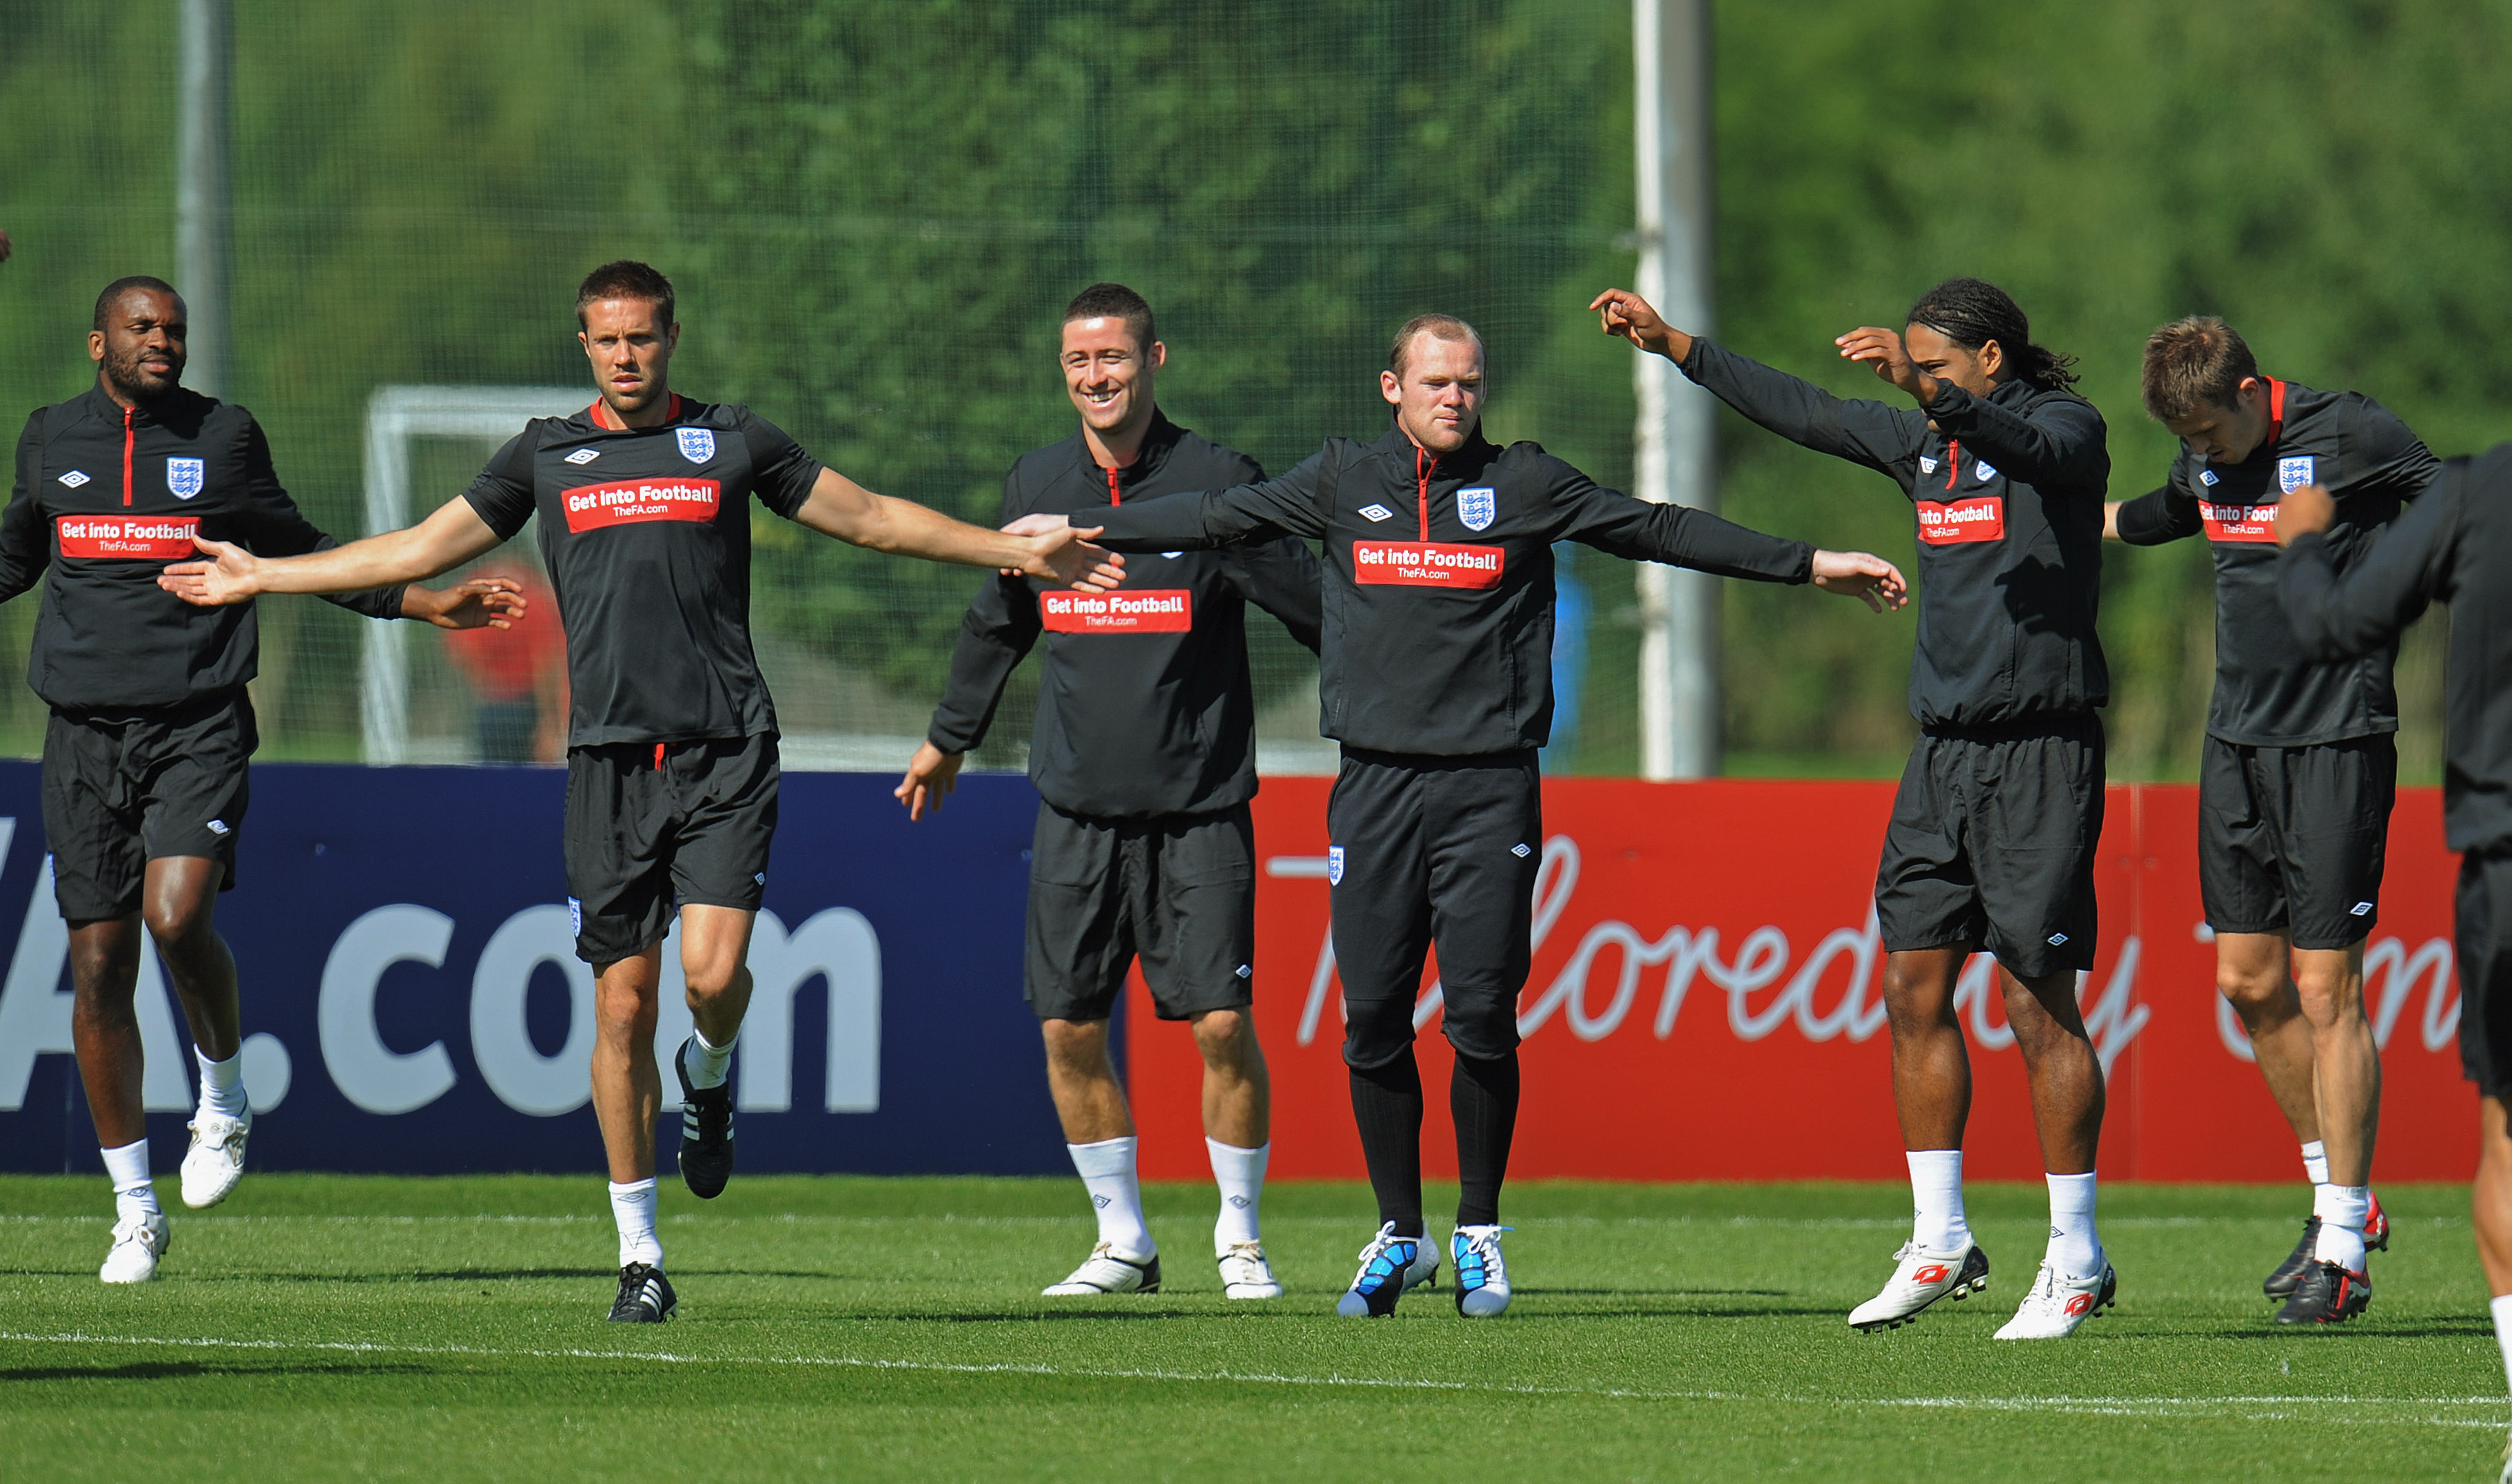 ST ALBANS, ENGLAND - AUGUST 31: Darren Bent, Matthew Upson, Gary Cahill and Wayne Rooney warm up during the England training session at London Colney on August 31, 2010 in St Albans, England.  (Photo by Michael Regan/Getty Images)